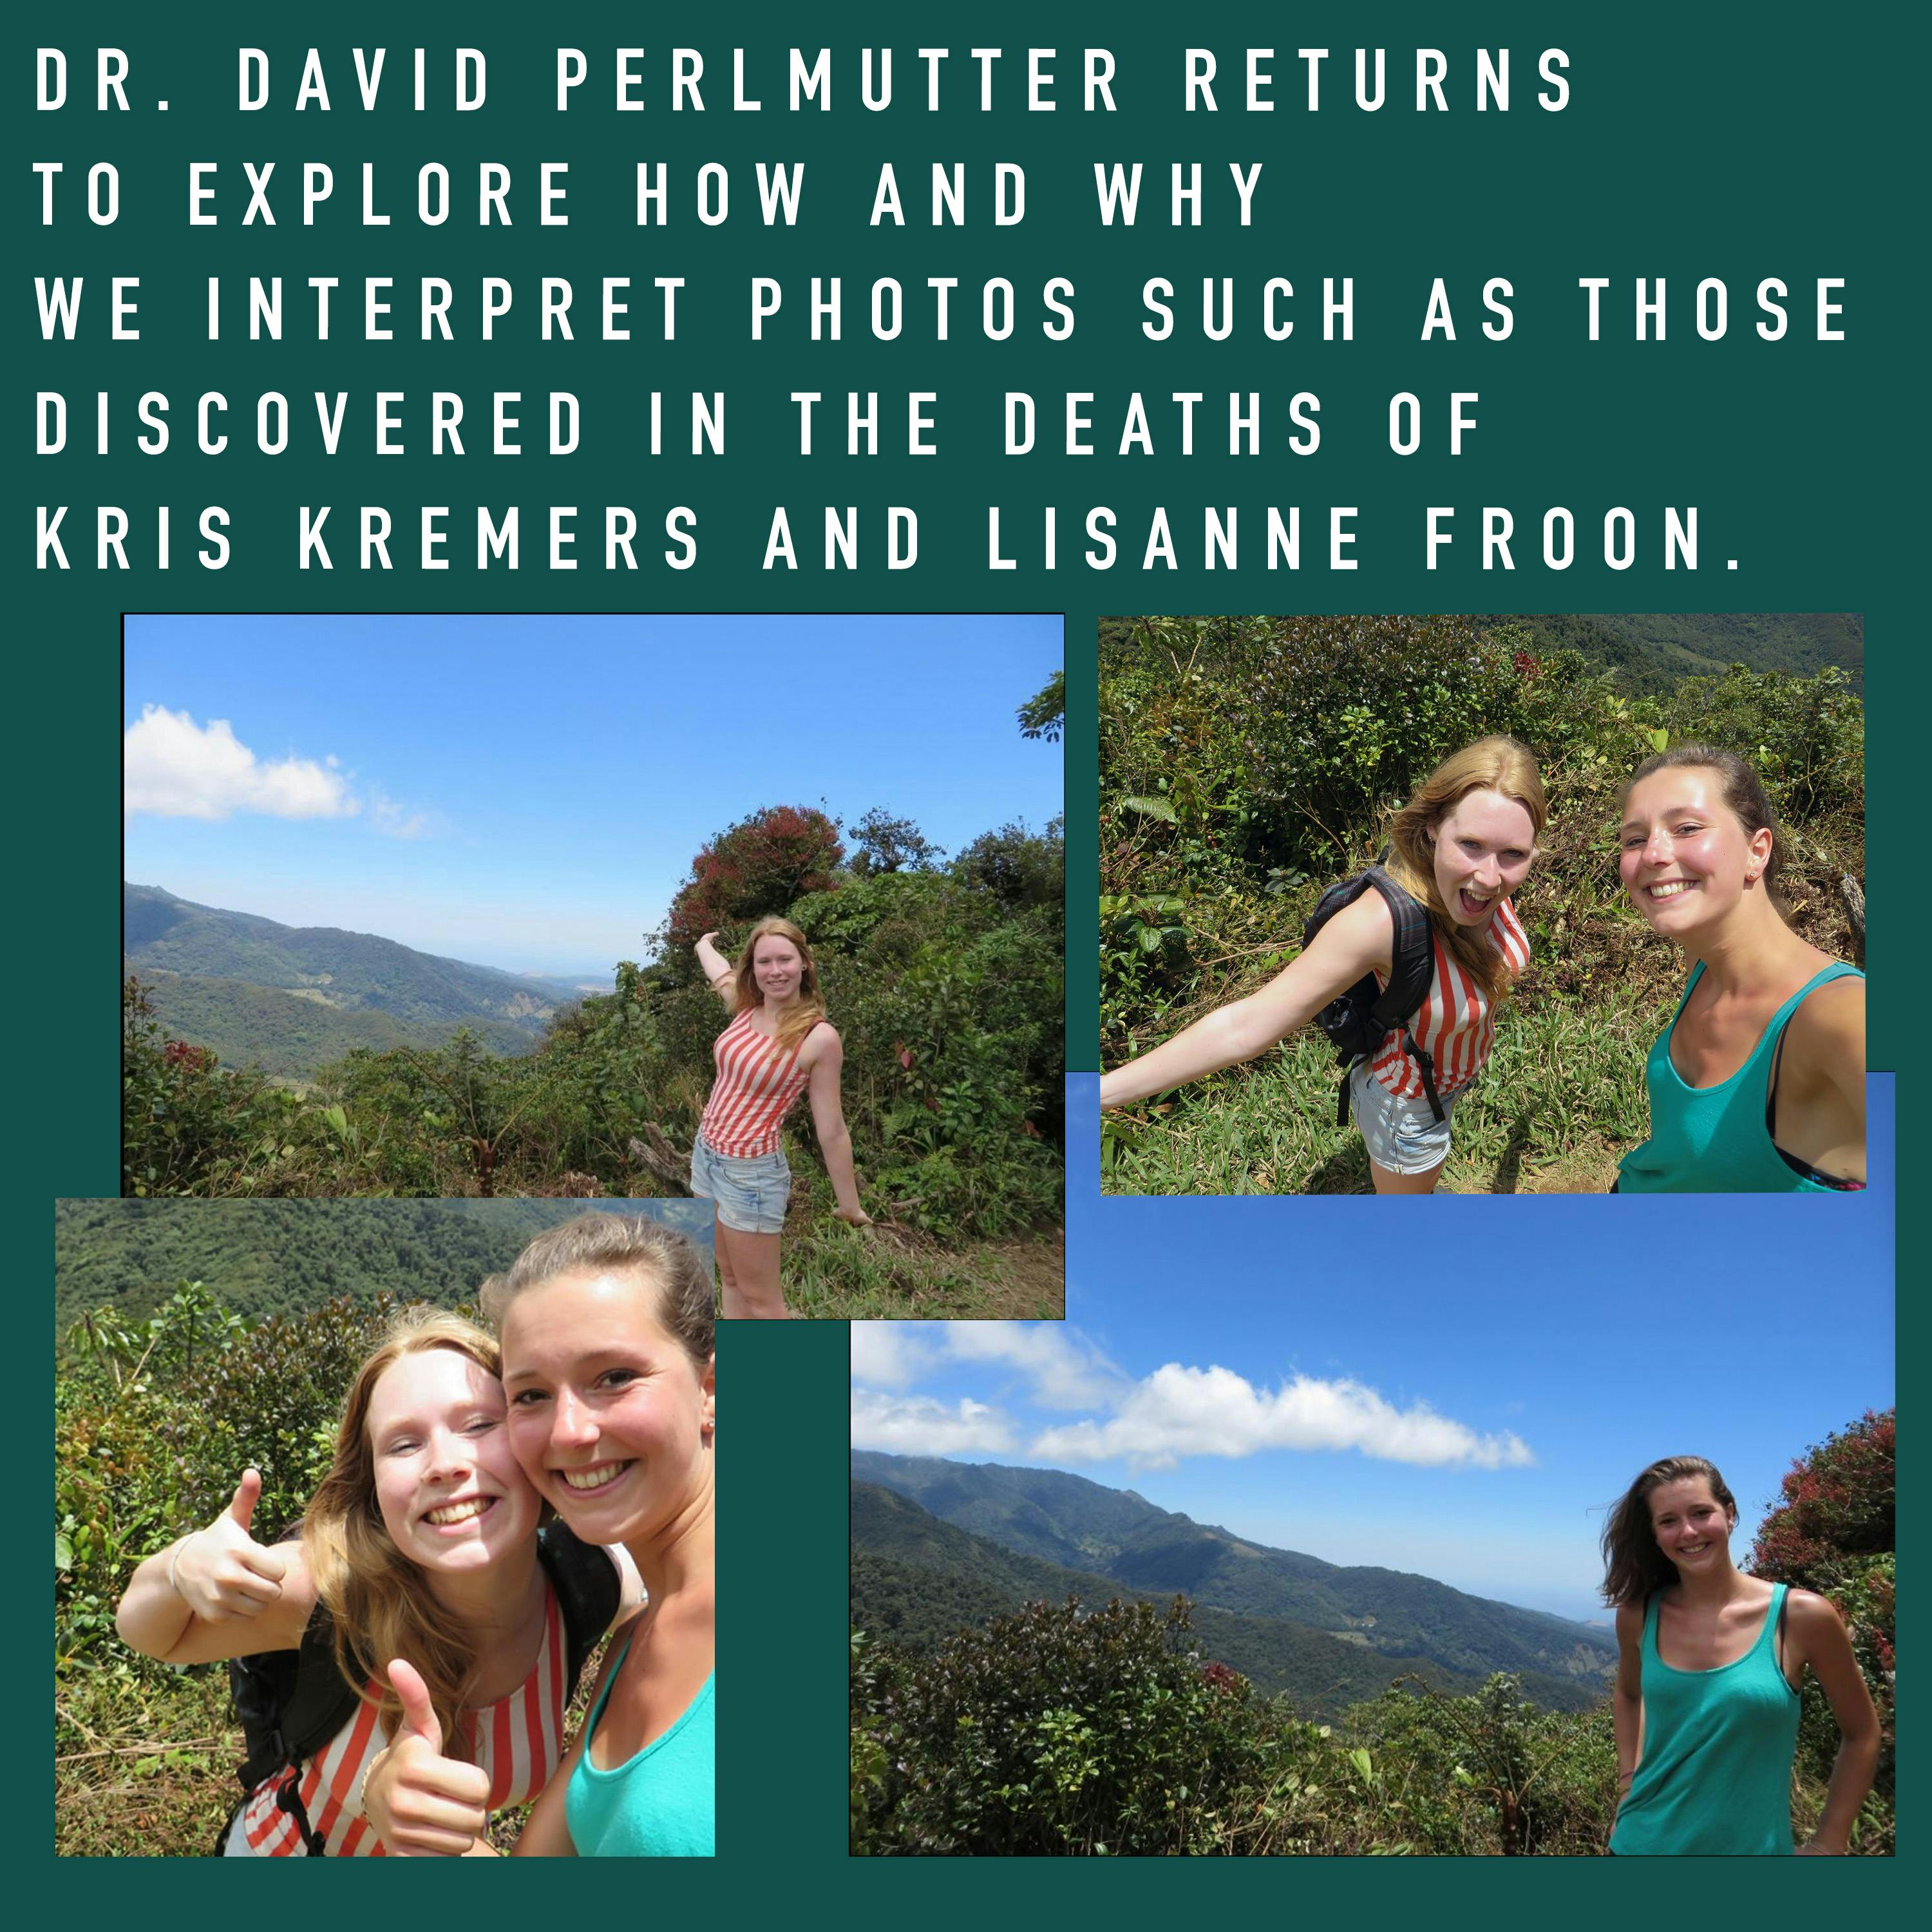 436 // The Mysterious Deaths of Kris Kremers & Lisanne Froon W/Prof. Perlmutter